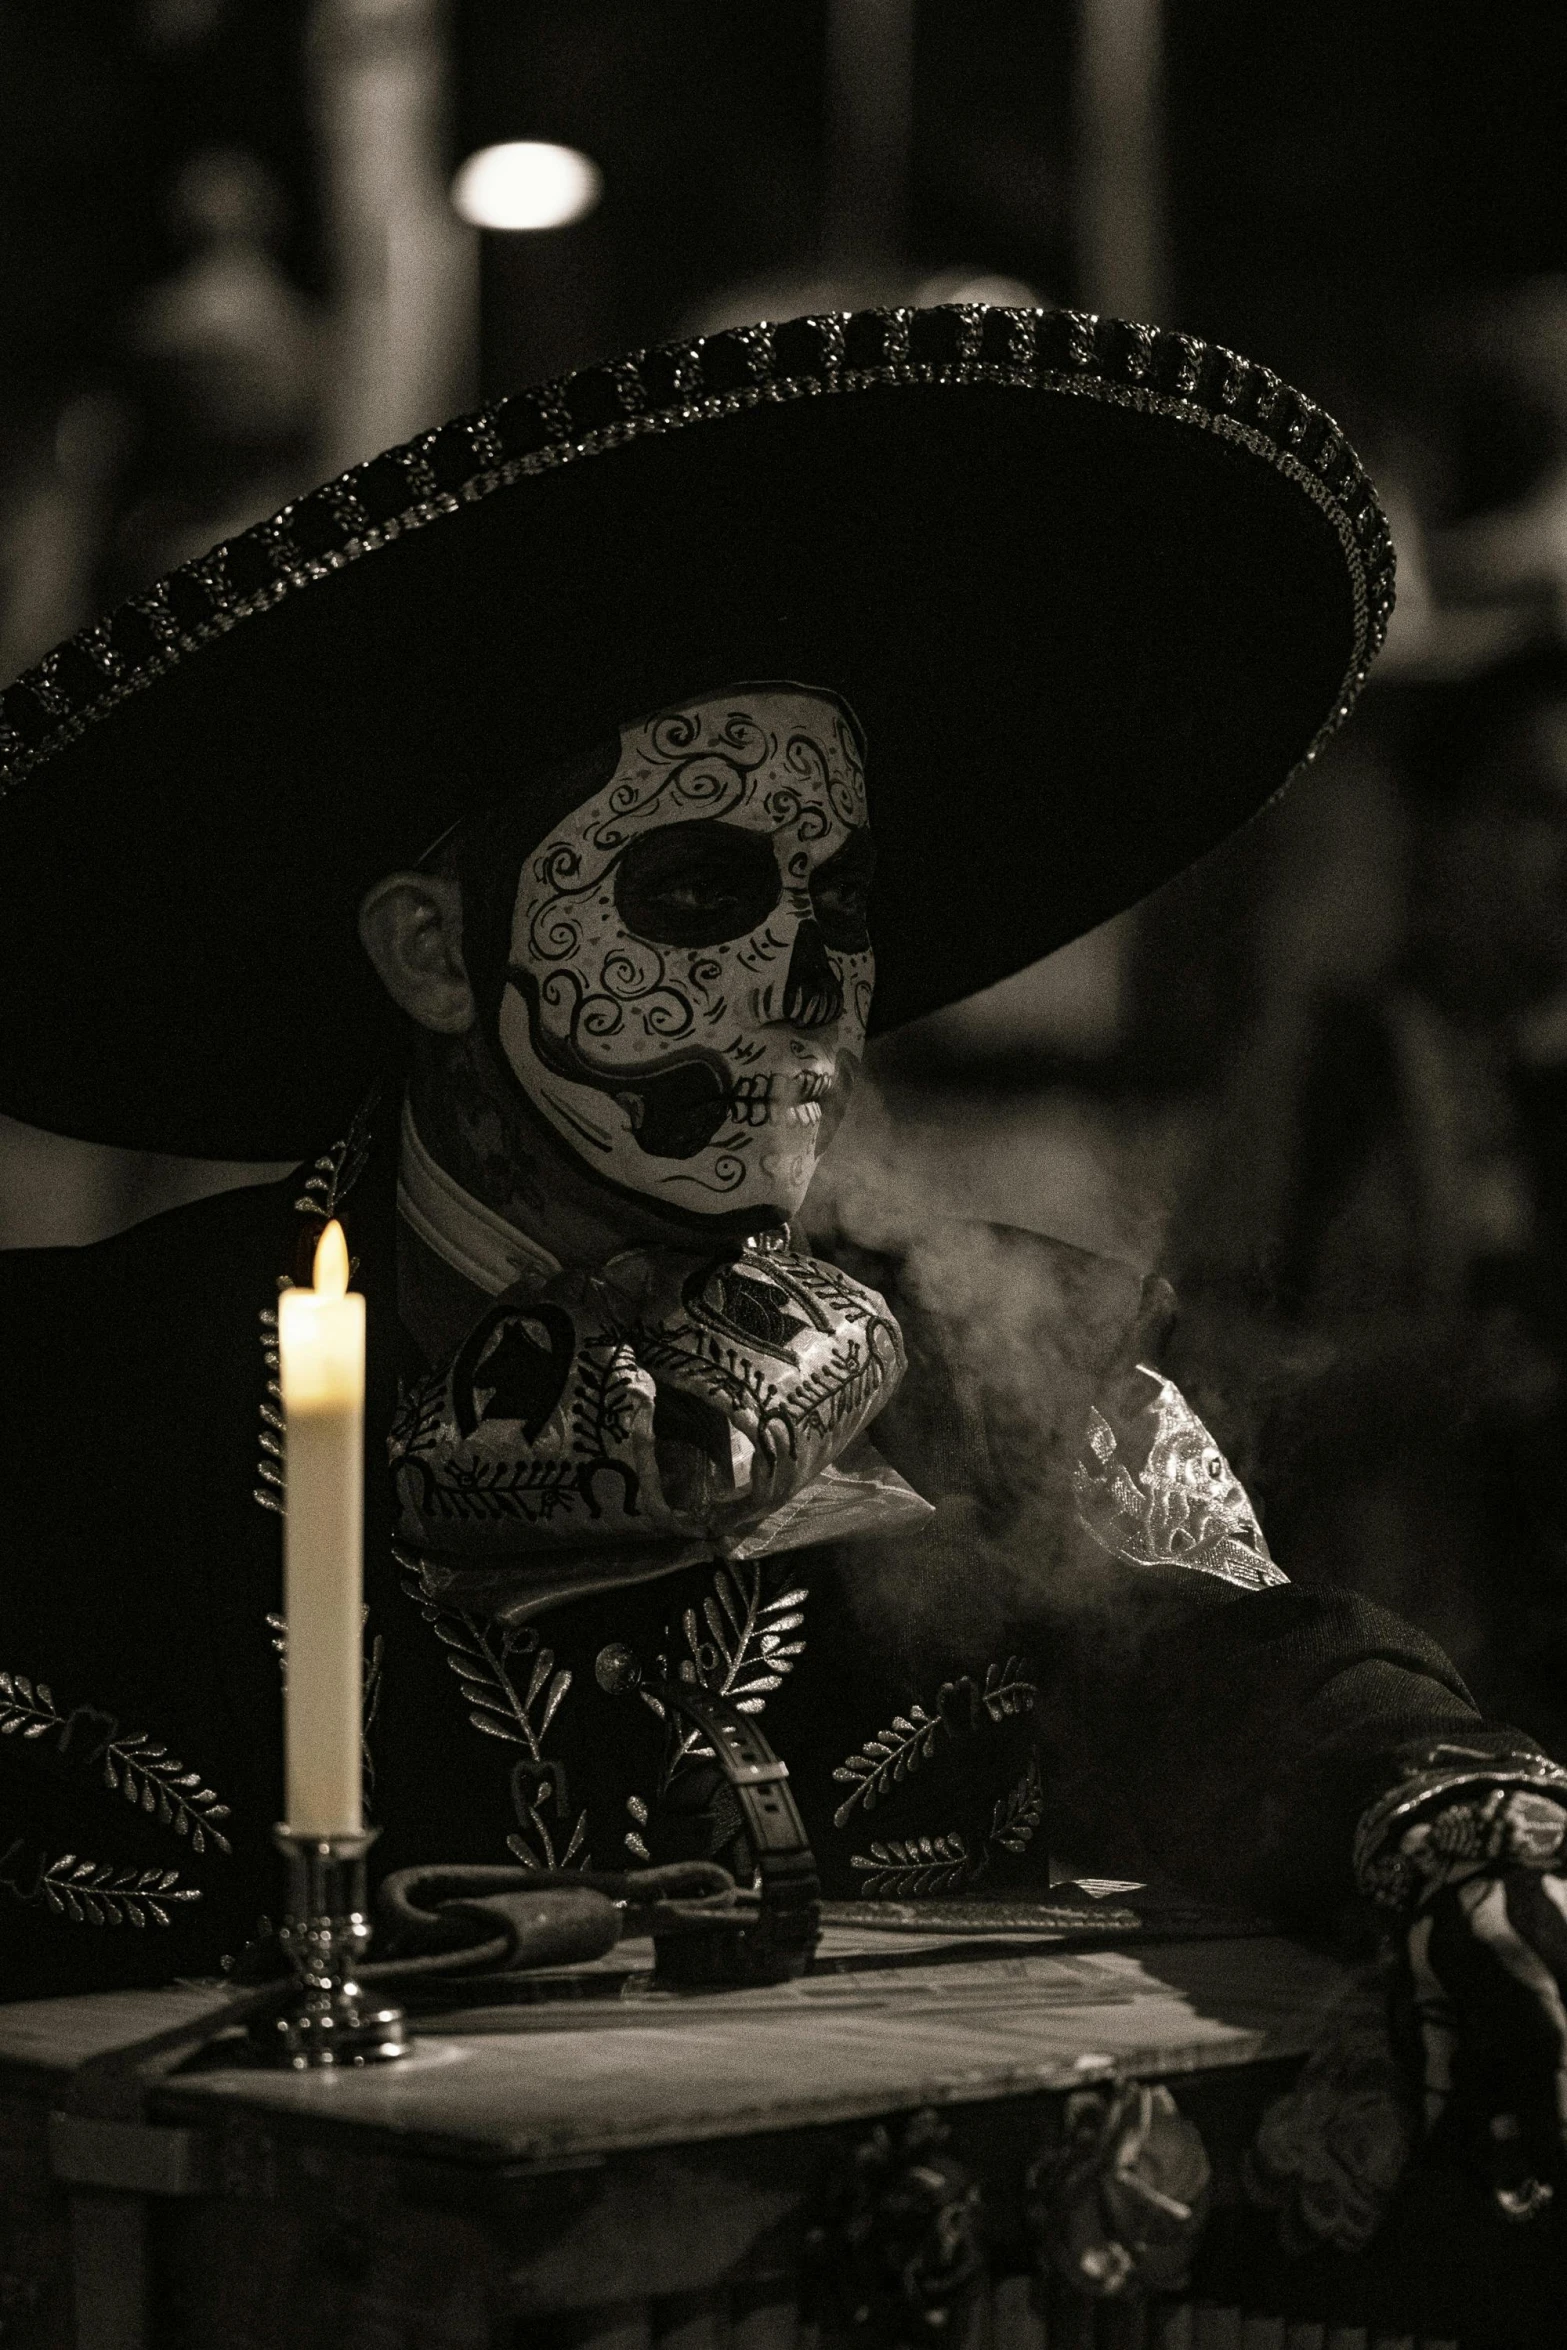 a skeleton in a sombrero smoking a cigarette while sitting next to a candle